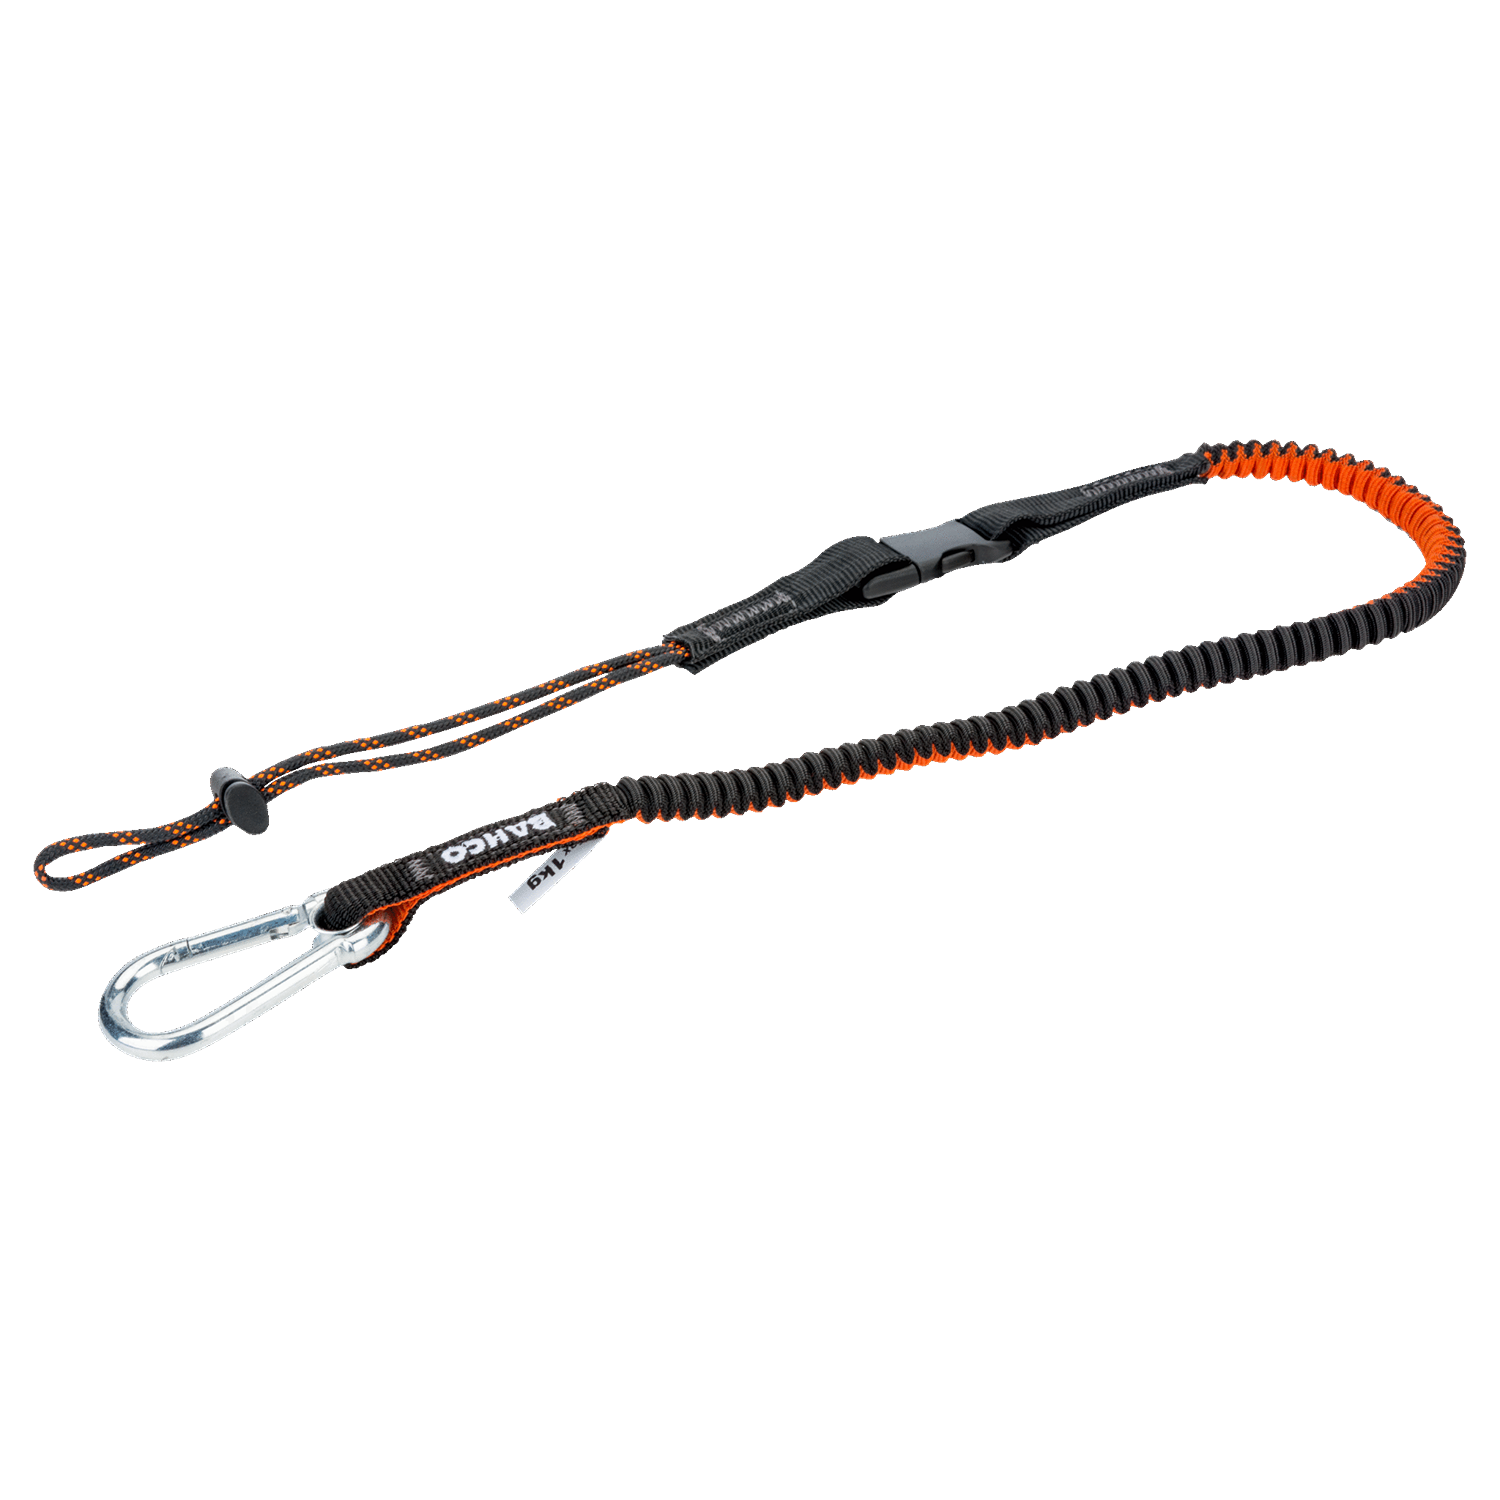 BAHCO 3875-LY3 Strap Lanyard with Fixed Carabiner 1 kg - Premium Lanyard from BAHCO - Shop now at Yew Aik.